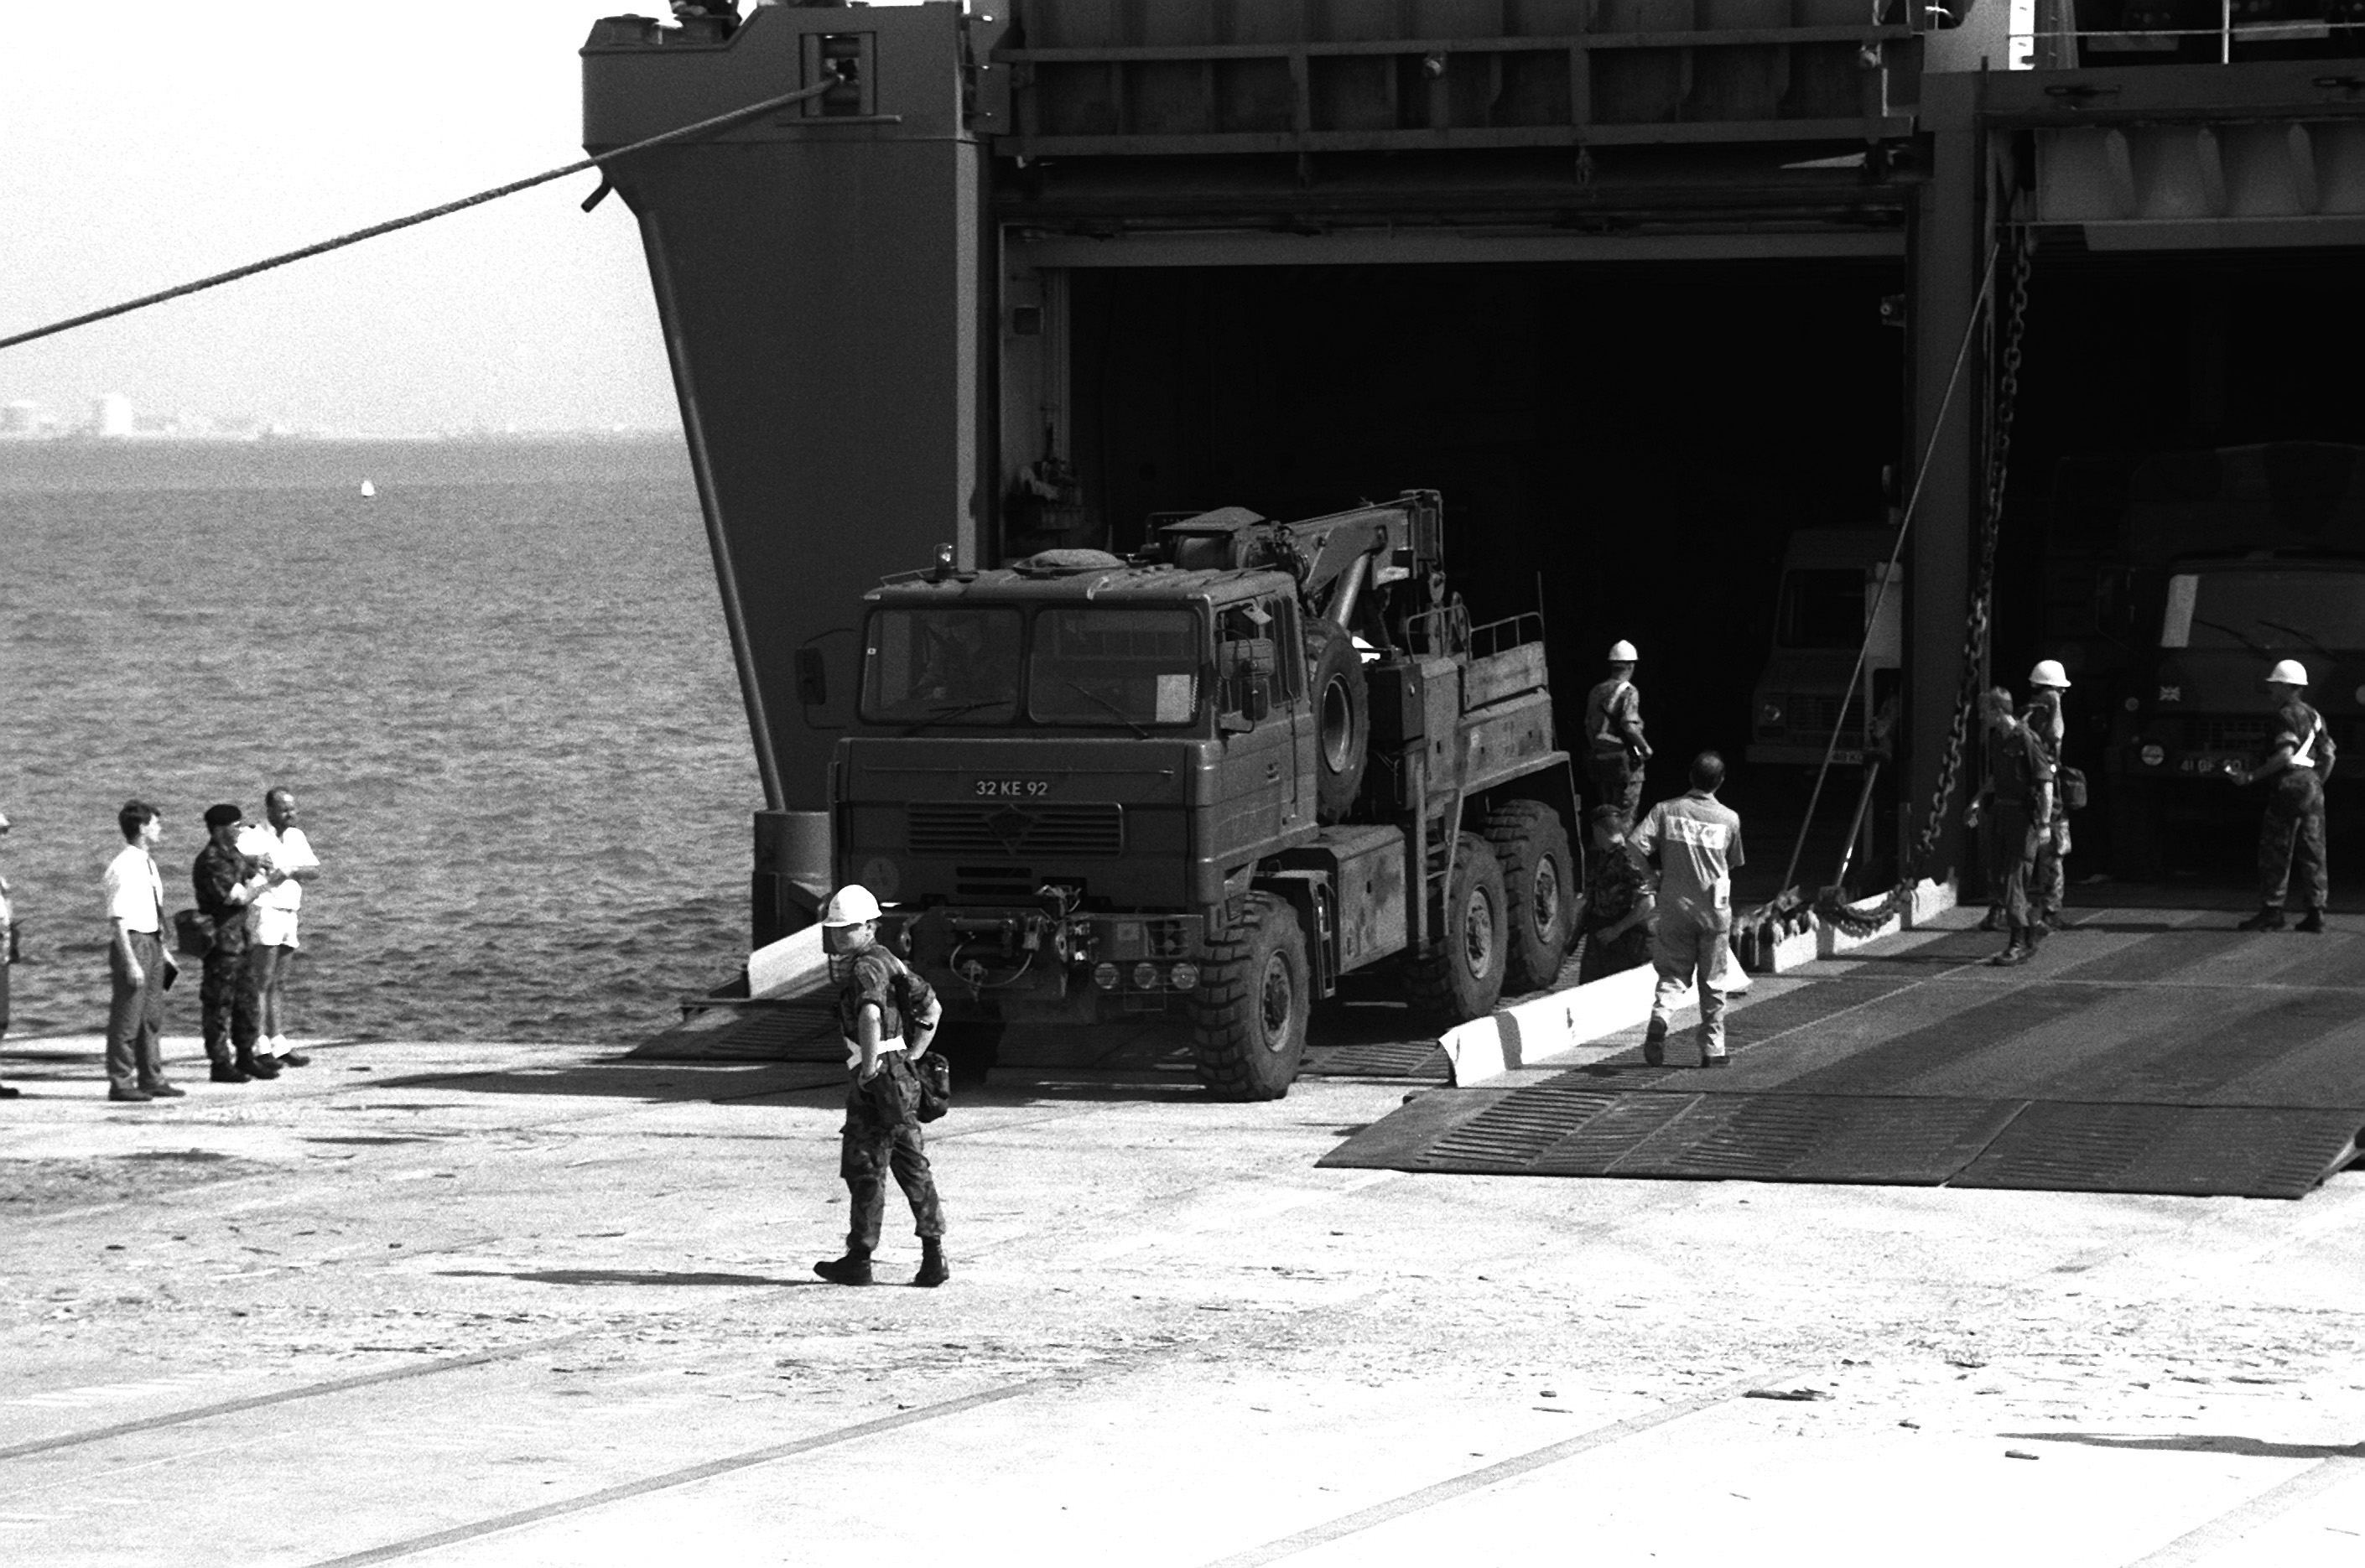 A British Foden 6x6 recovery vehicle leaves the Danish cargo ship Dana Cimbria during Operation Desert Shield